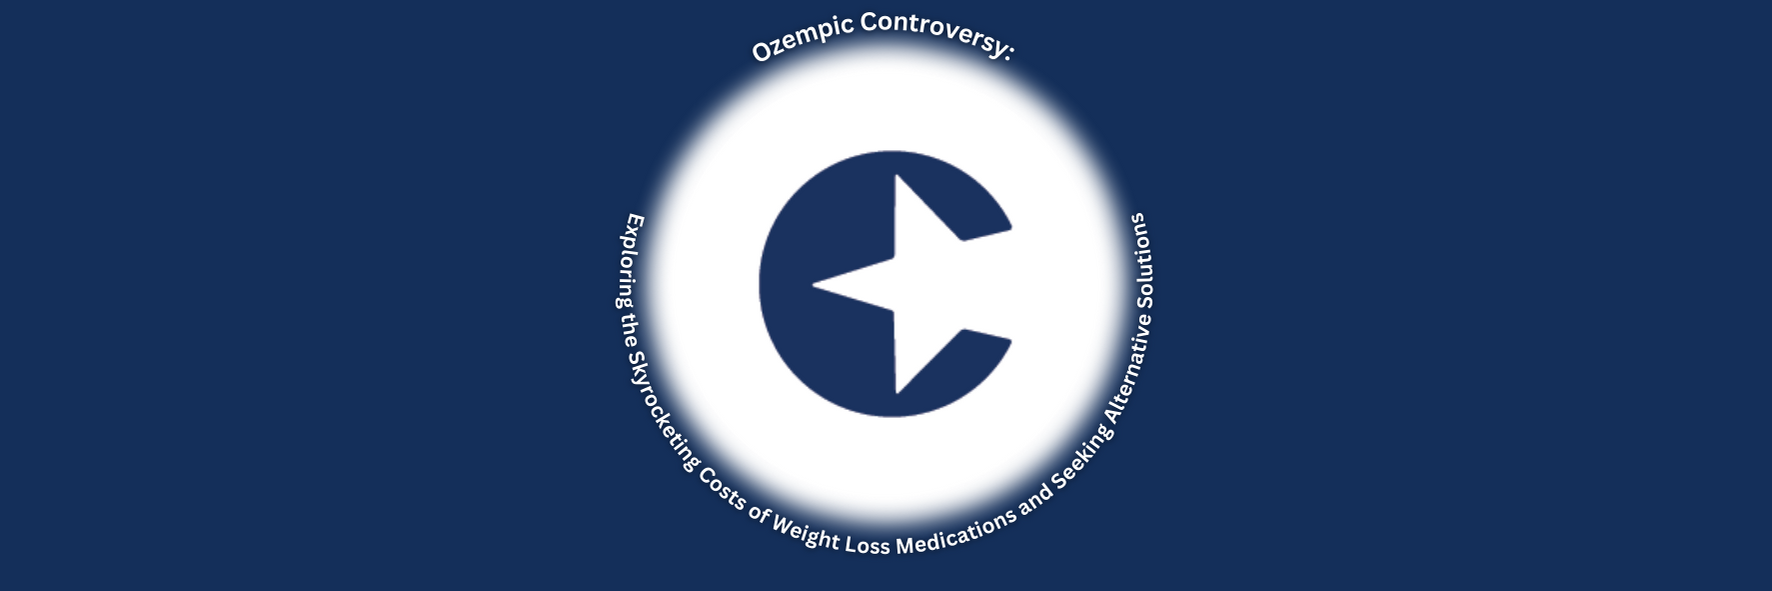 Ozempic Controversy: Exploring the Skyrocketing Costs of Weight Loss Medications and Seeking Alternative Solutions